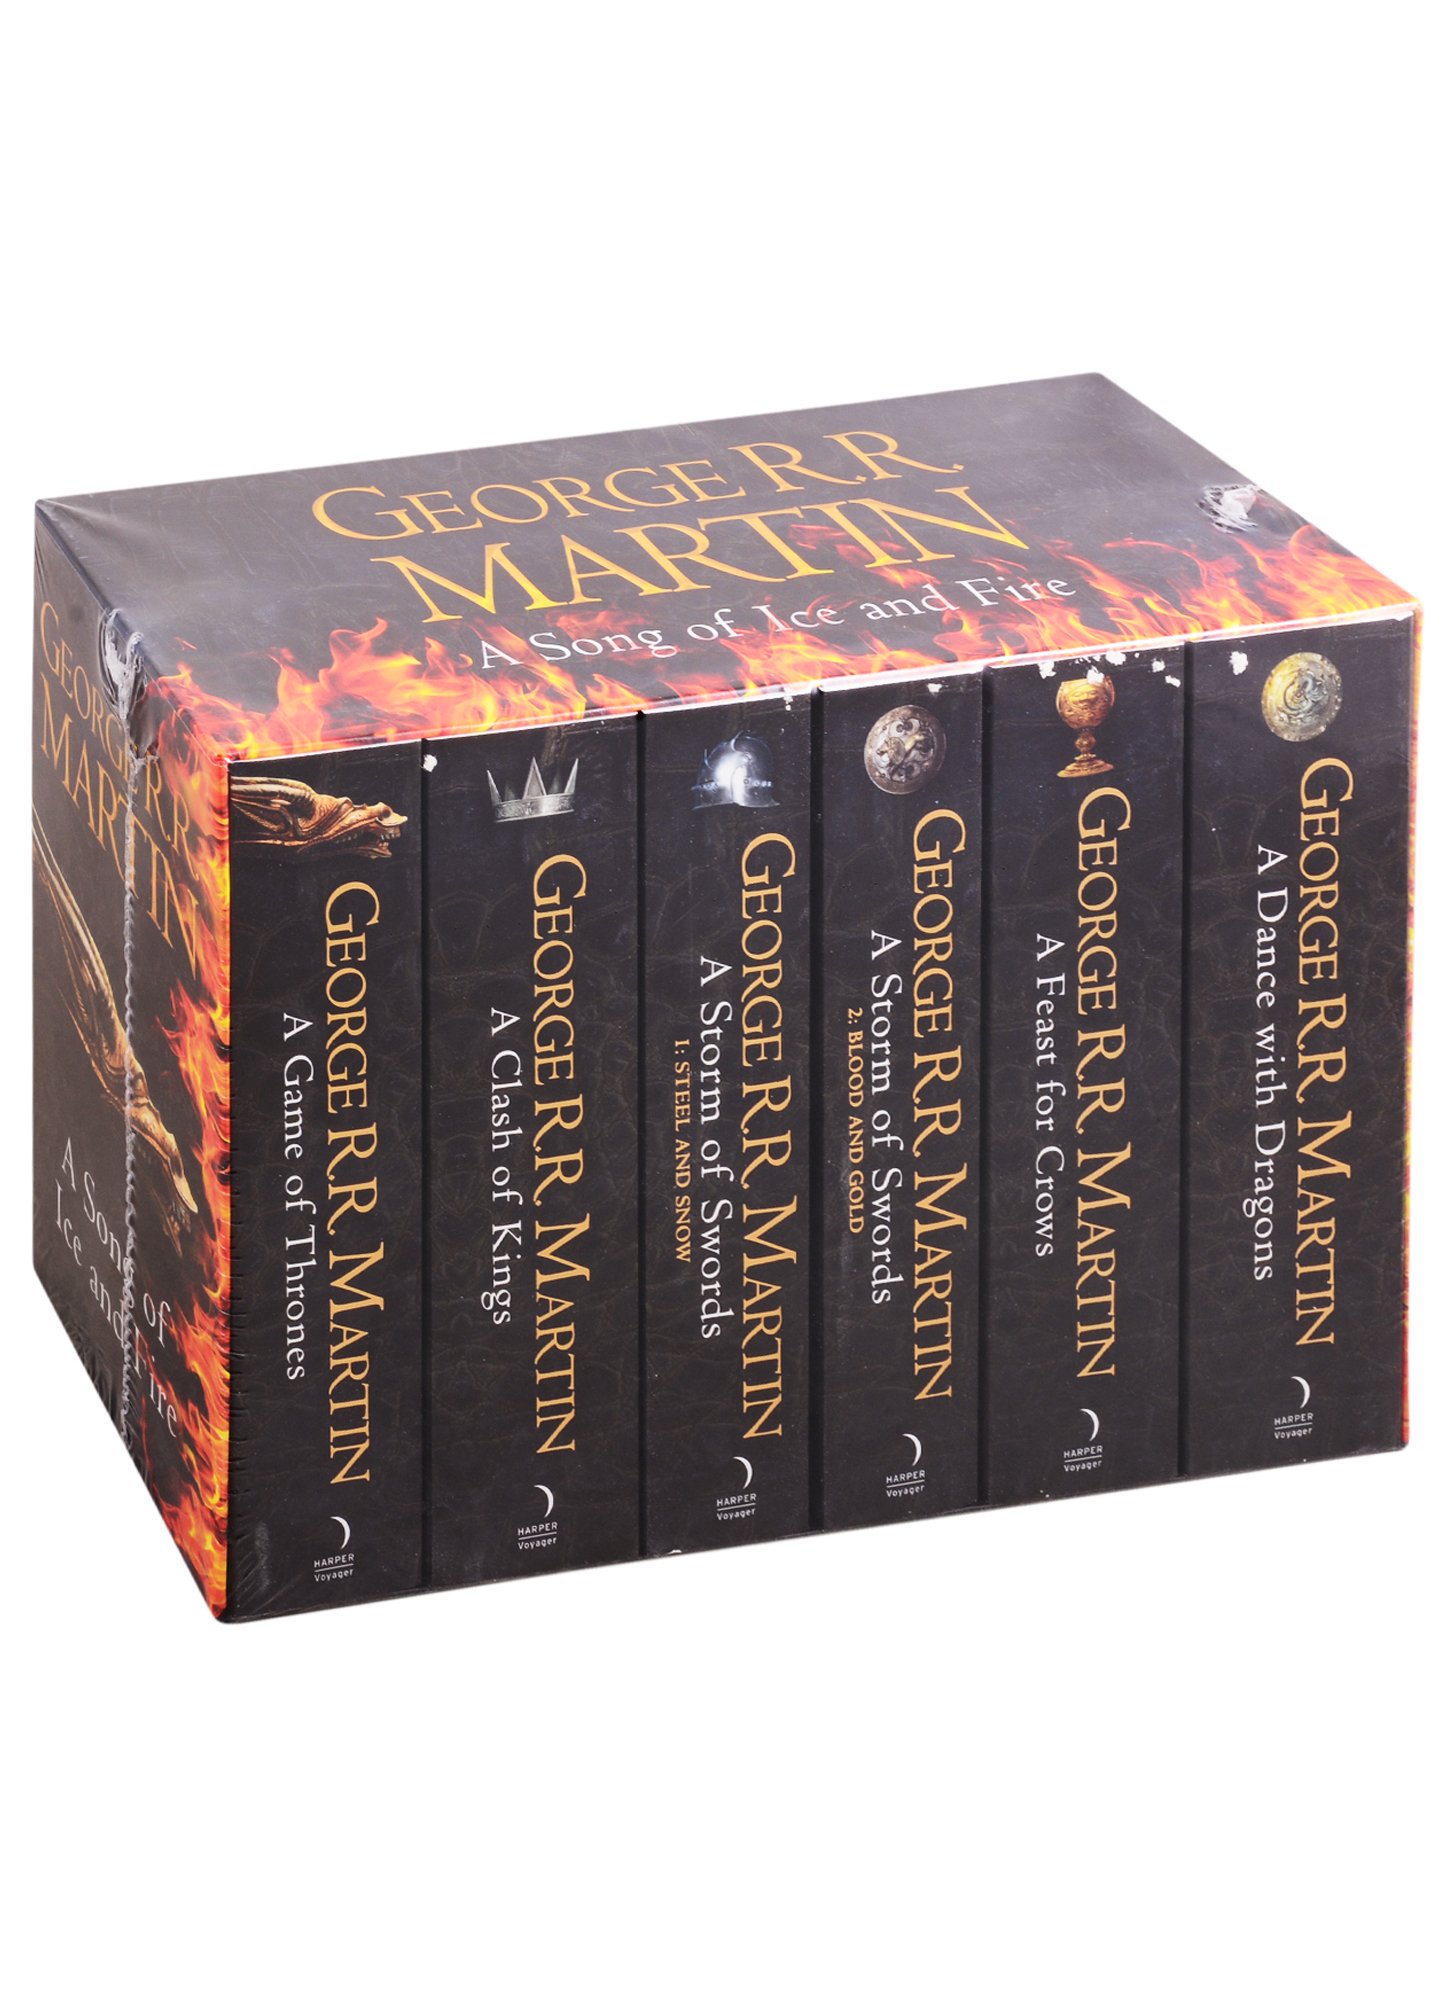 Martin George Raymond Richard Song of Ice and Fire-Game of Thrones: The complete box set of all 6 books Martin George R. R. martin g garcia e antonsson jr antonsson l the world of ice